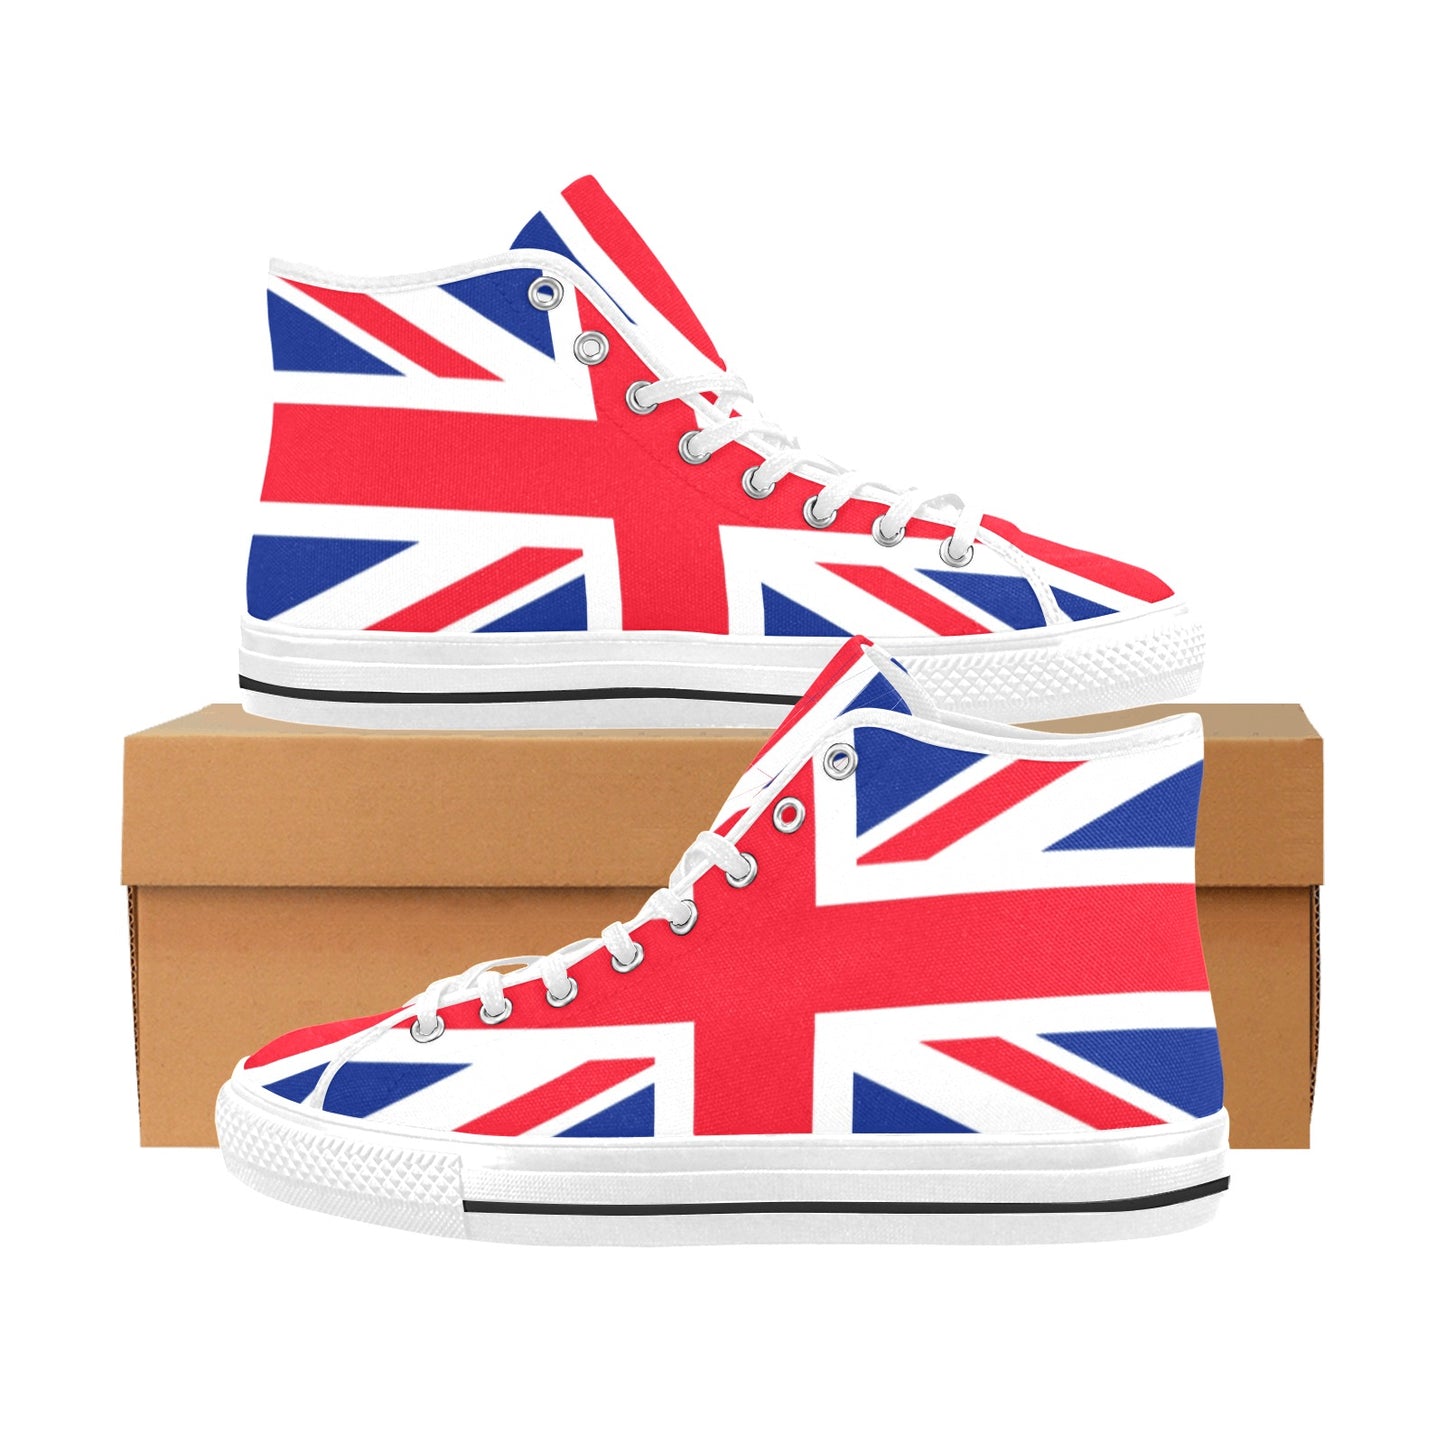 British Flag Women High Top Shoes, Union Jack Red White Blue United Kingdom Lace Up Sneakers Footwear Canvas Streetwear Girls Designer